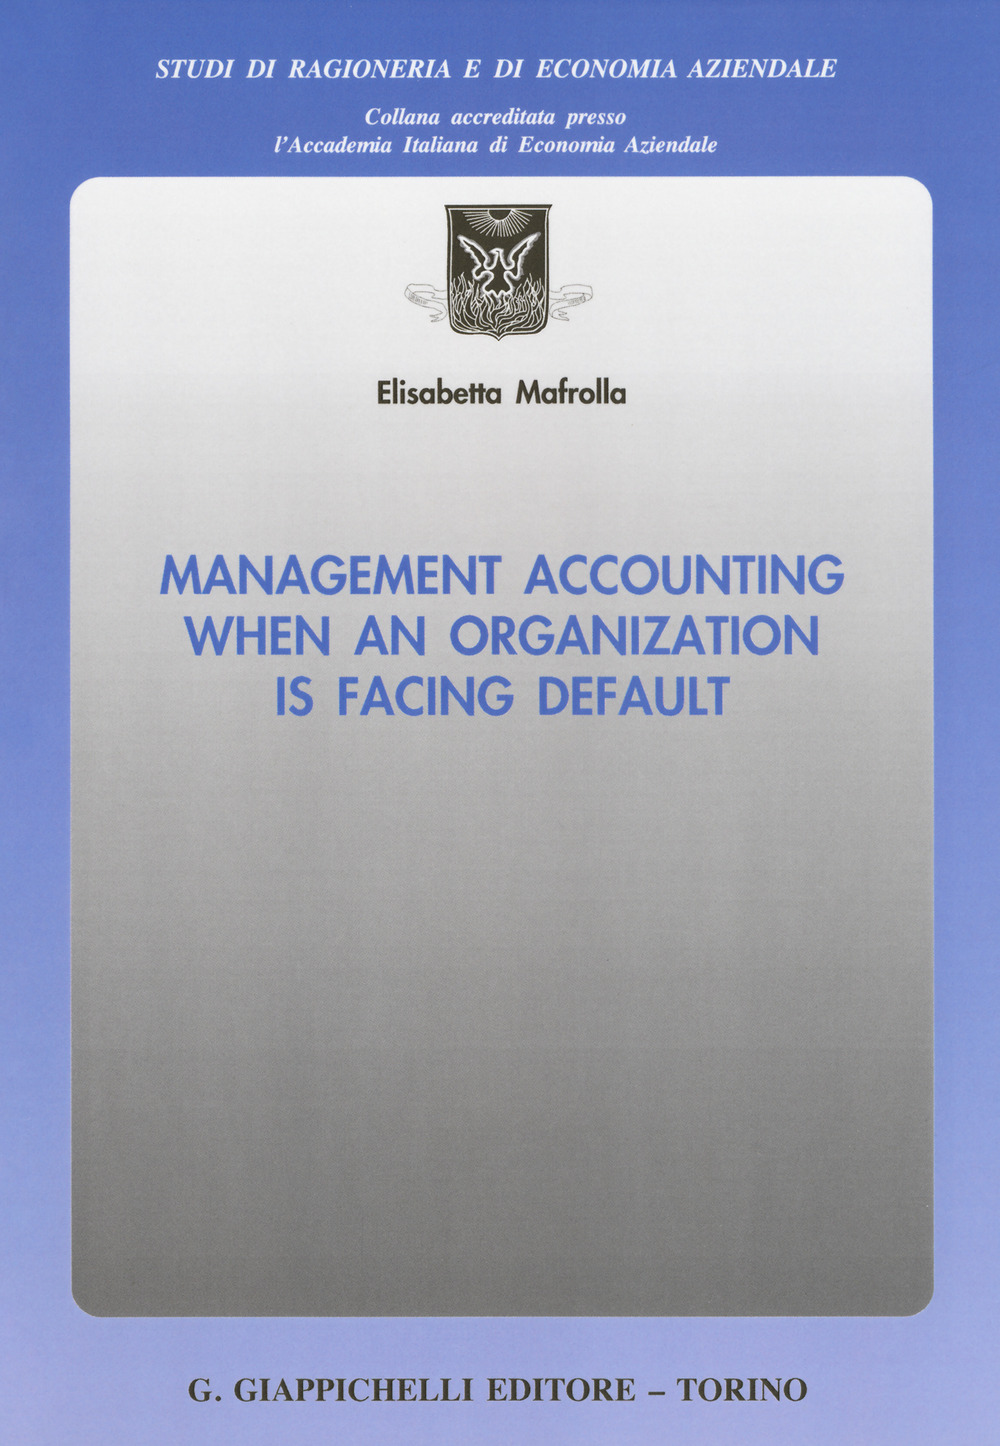 Management accounting when an organization is facing default